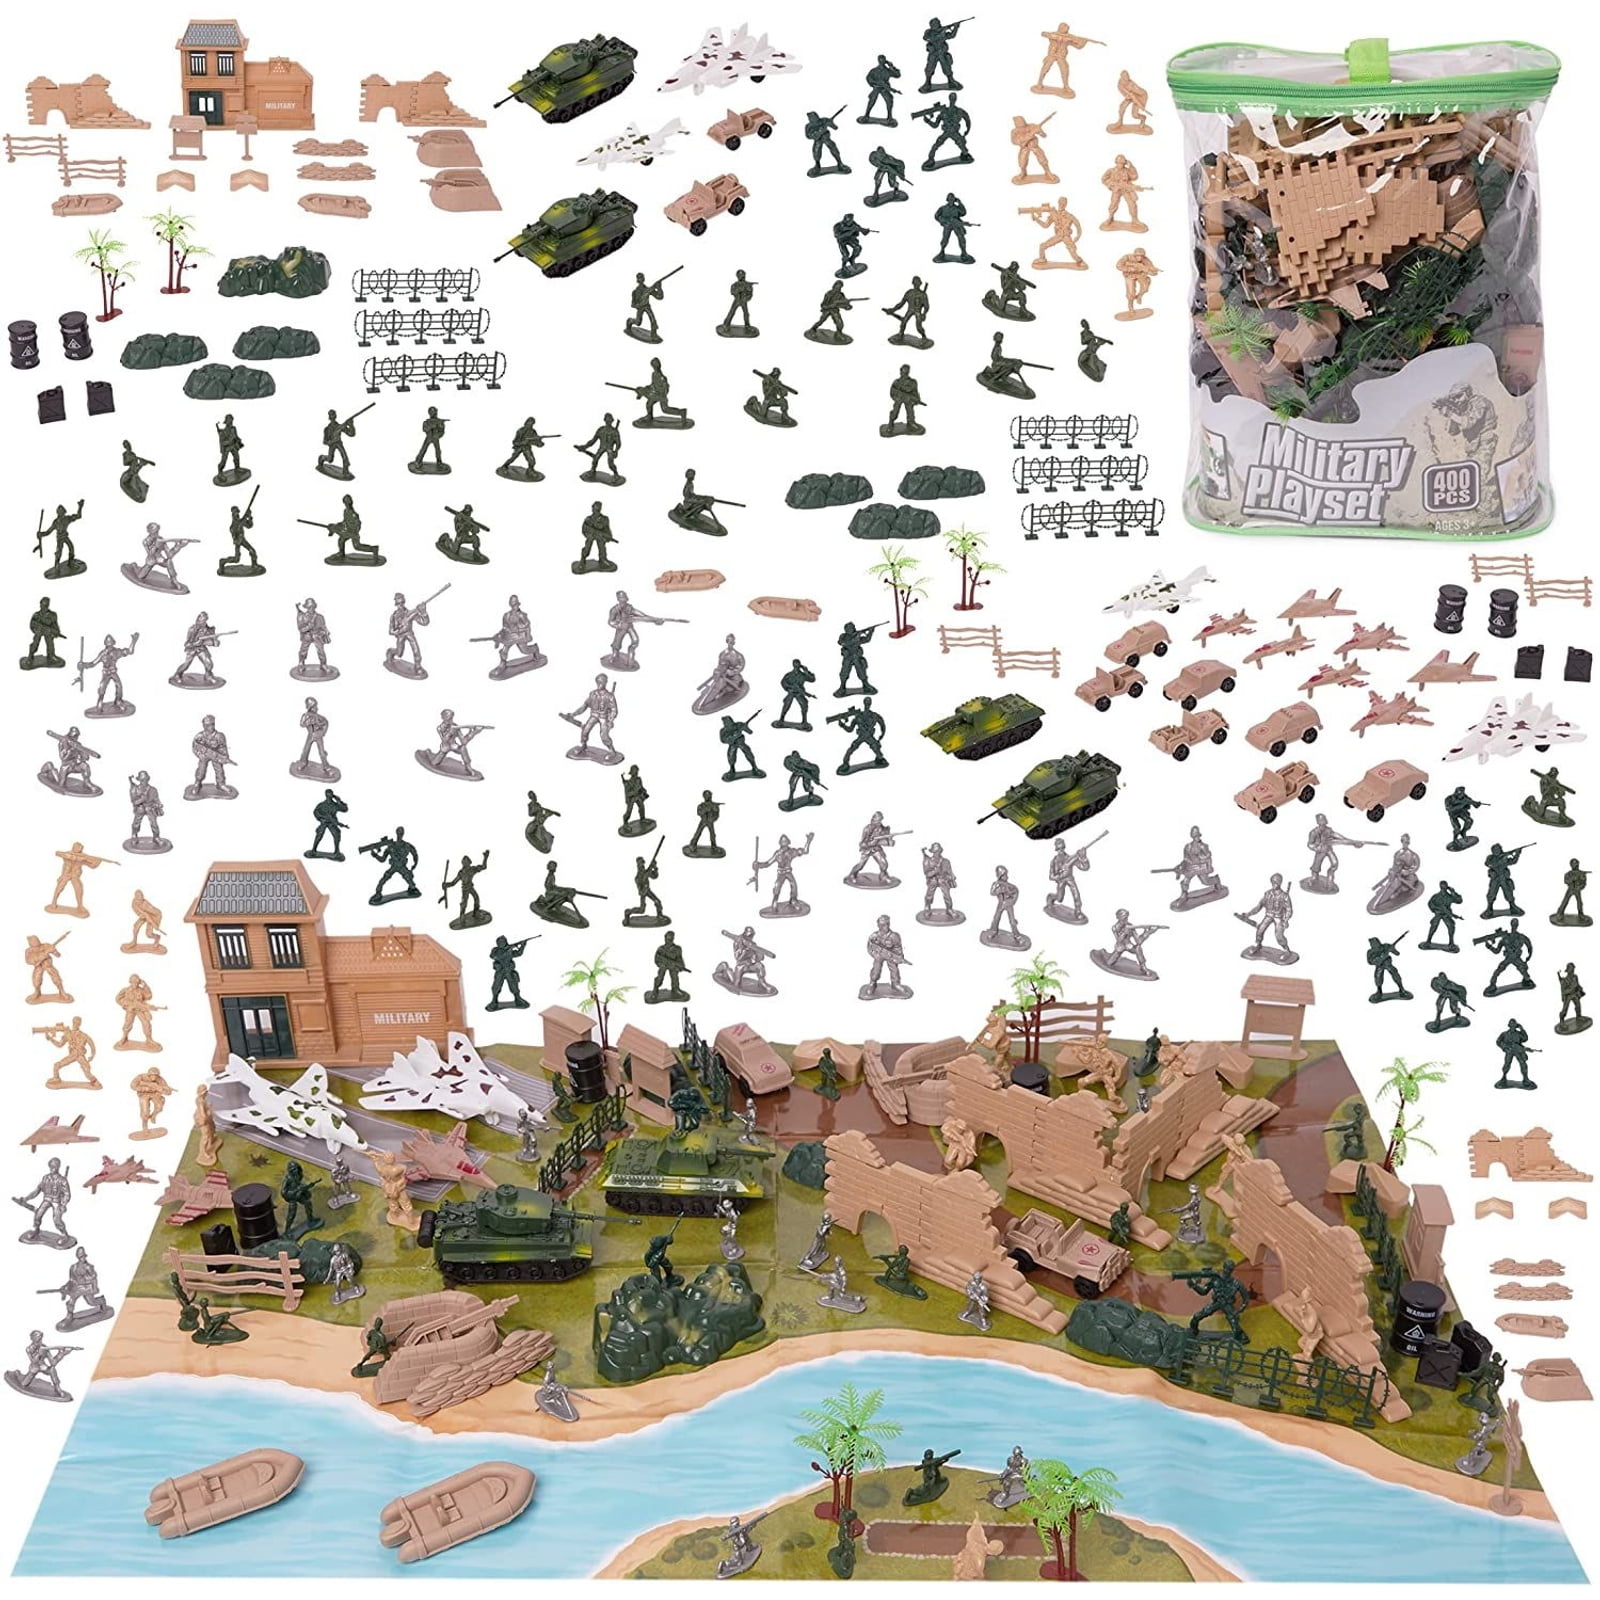 Miniature Army Playset War Soldier Male Action Figures Toy Toy Model Layout 